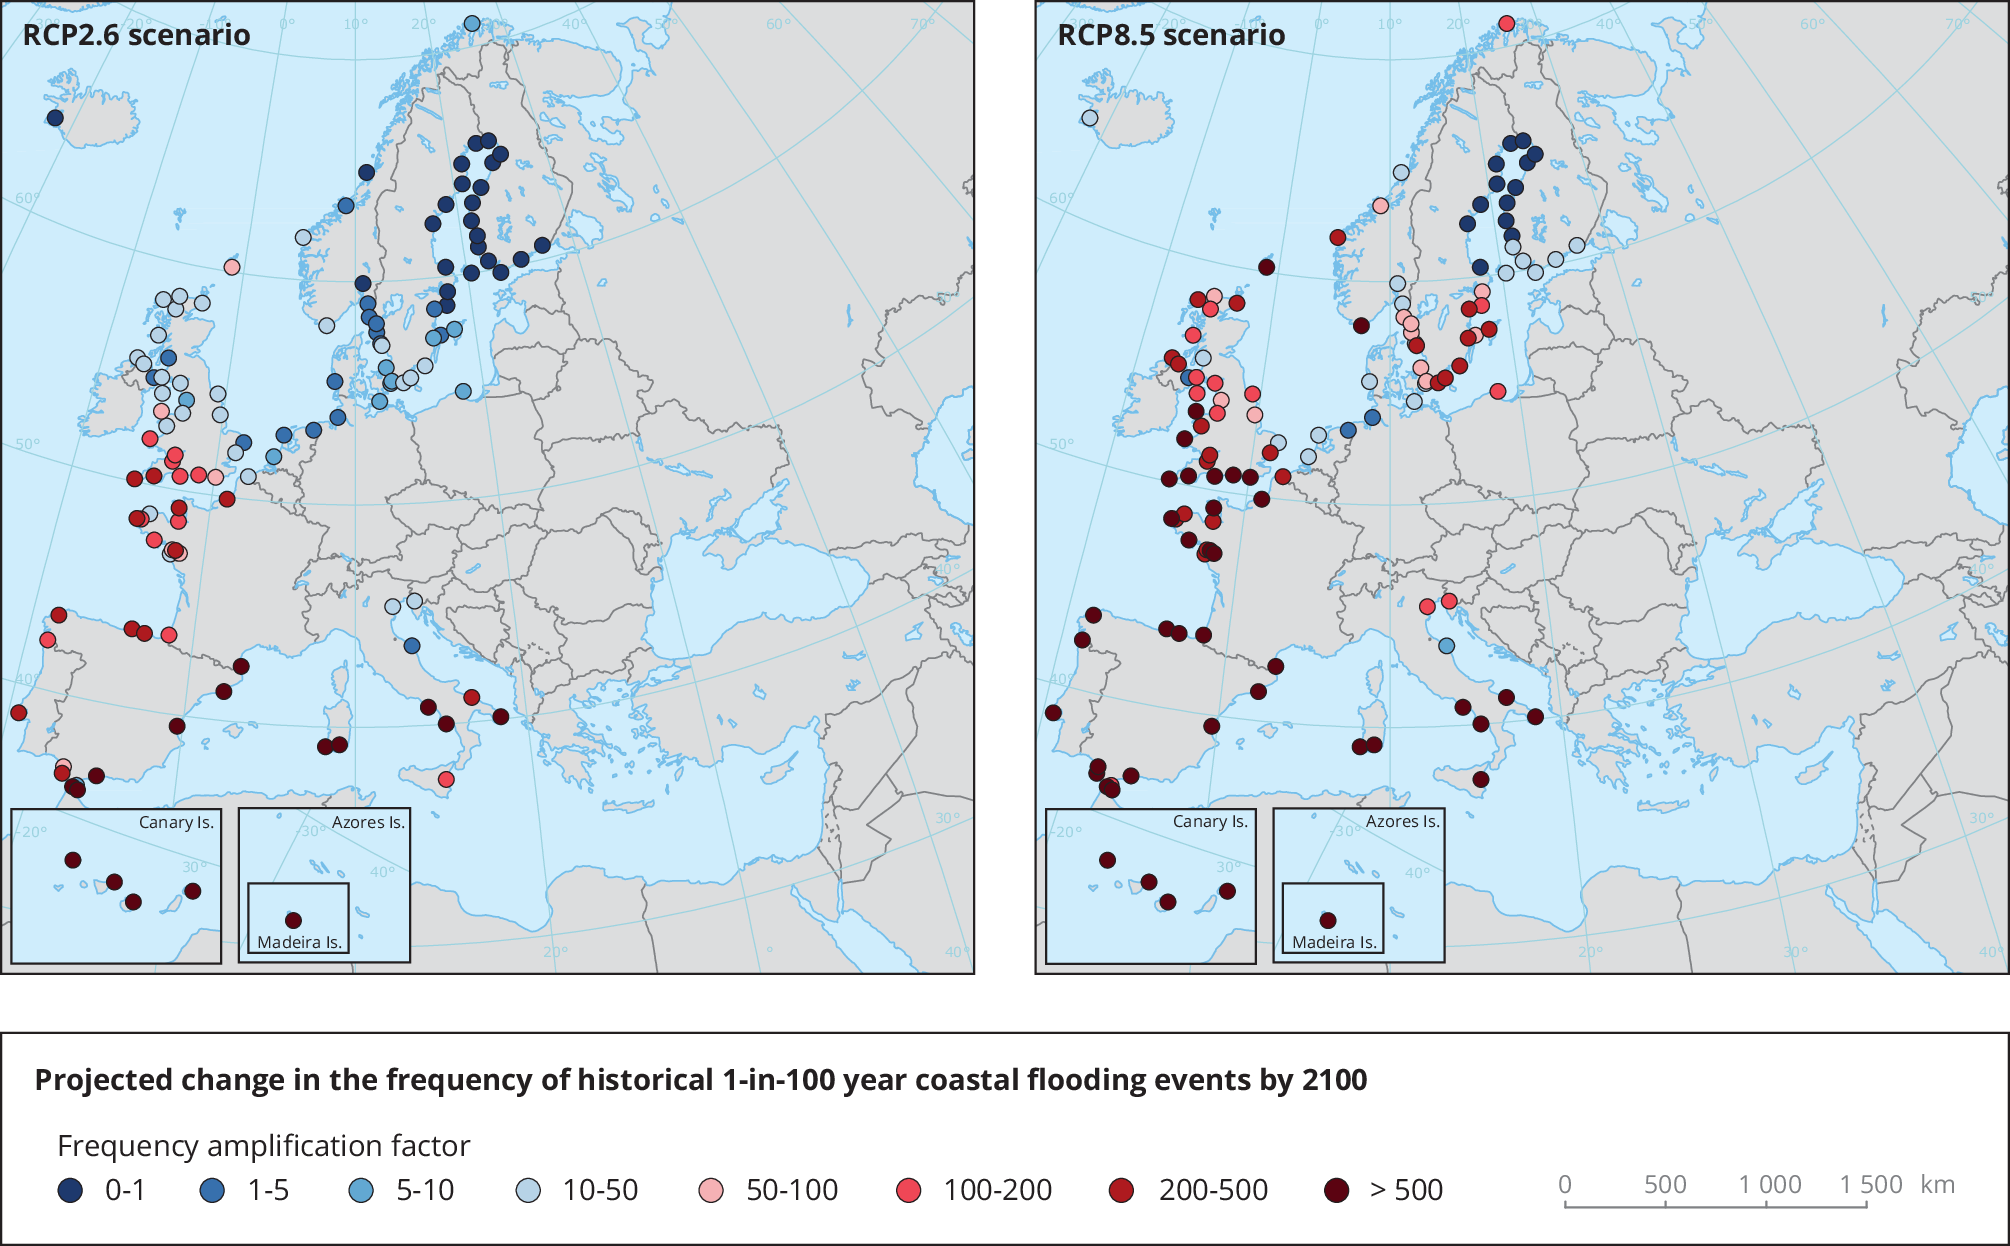 Change in the frequency of flooding events in Europe given projected sea level rise under two climate scenarios